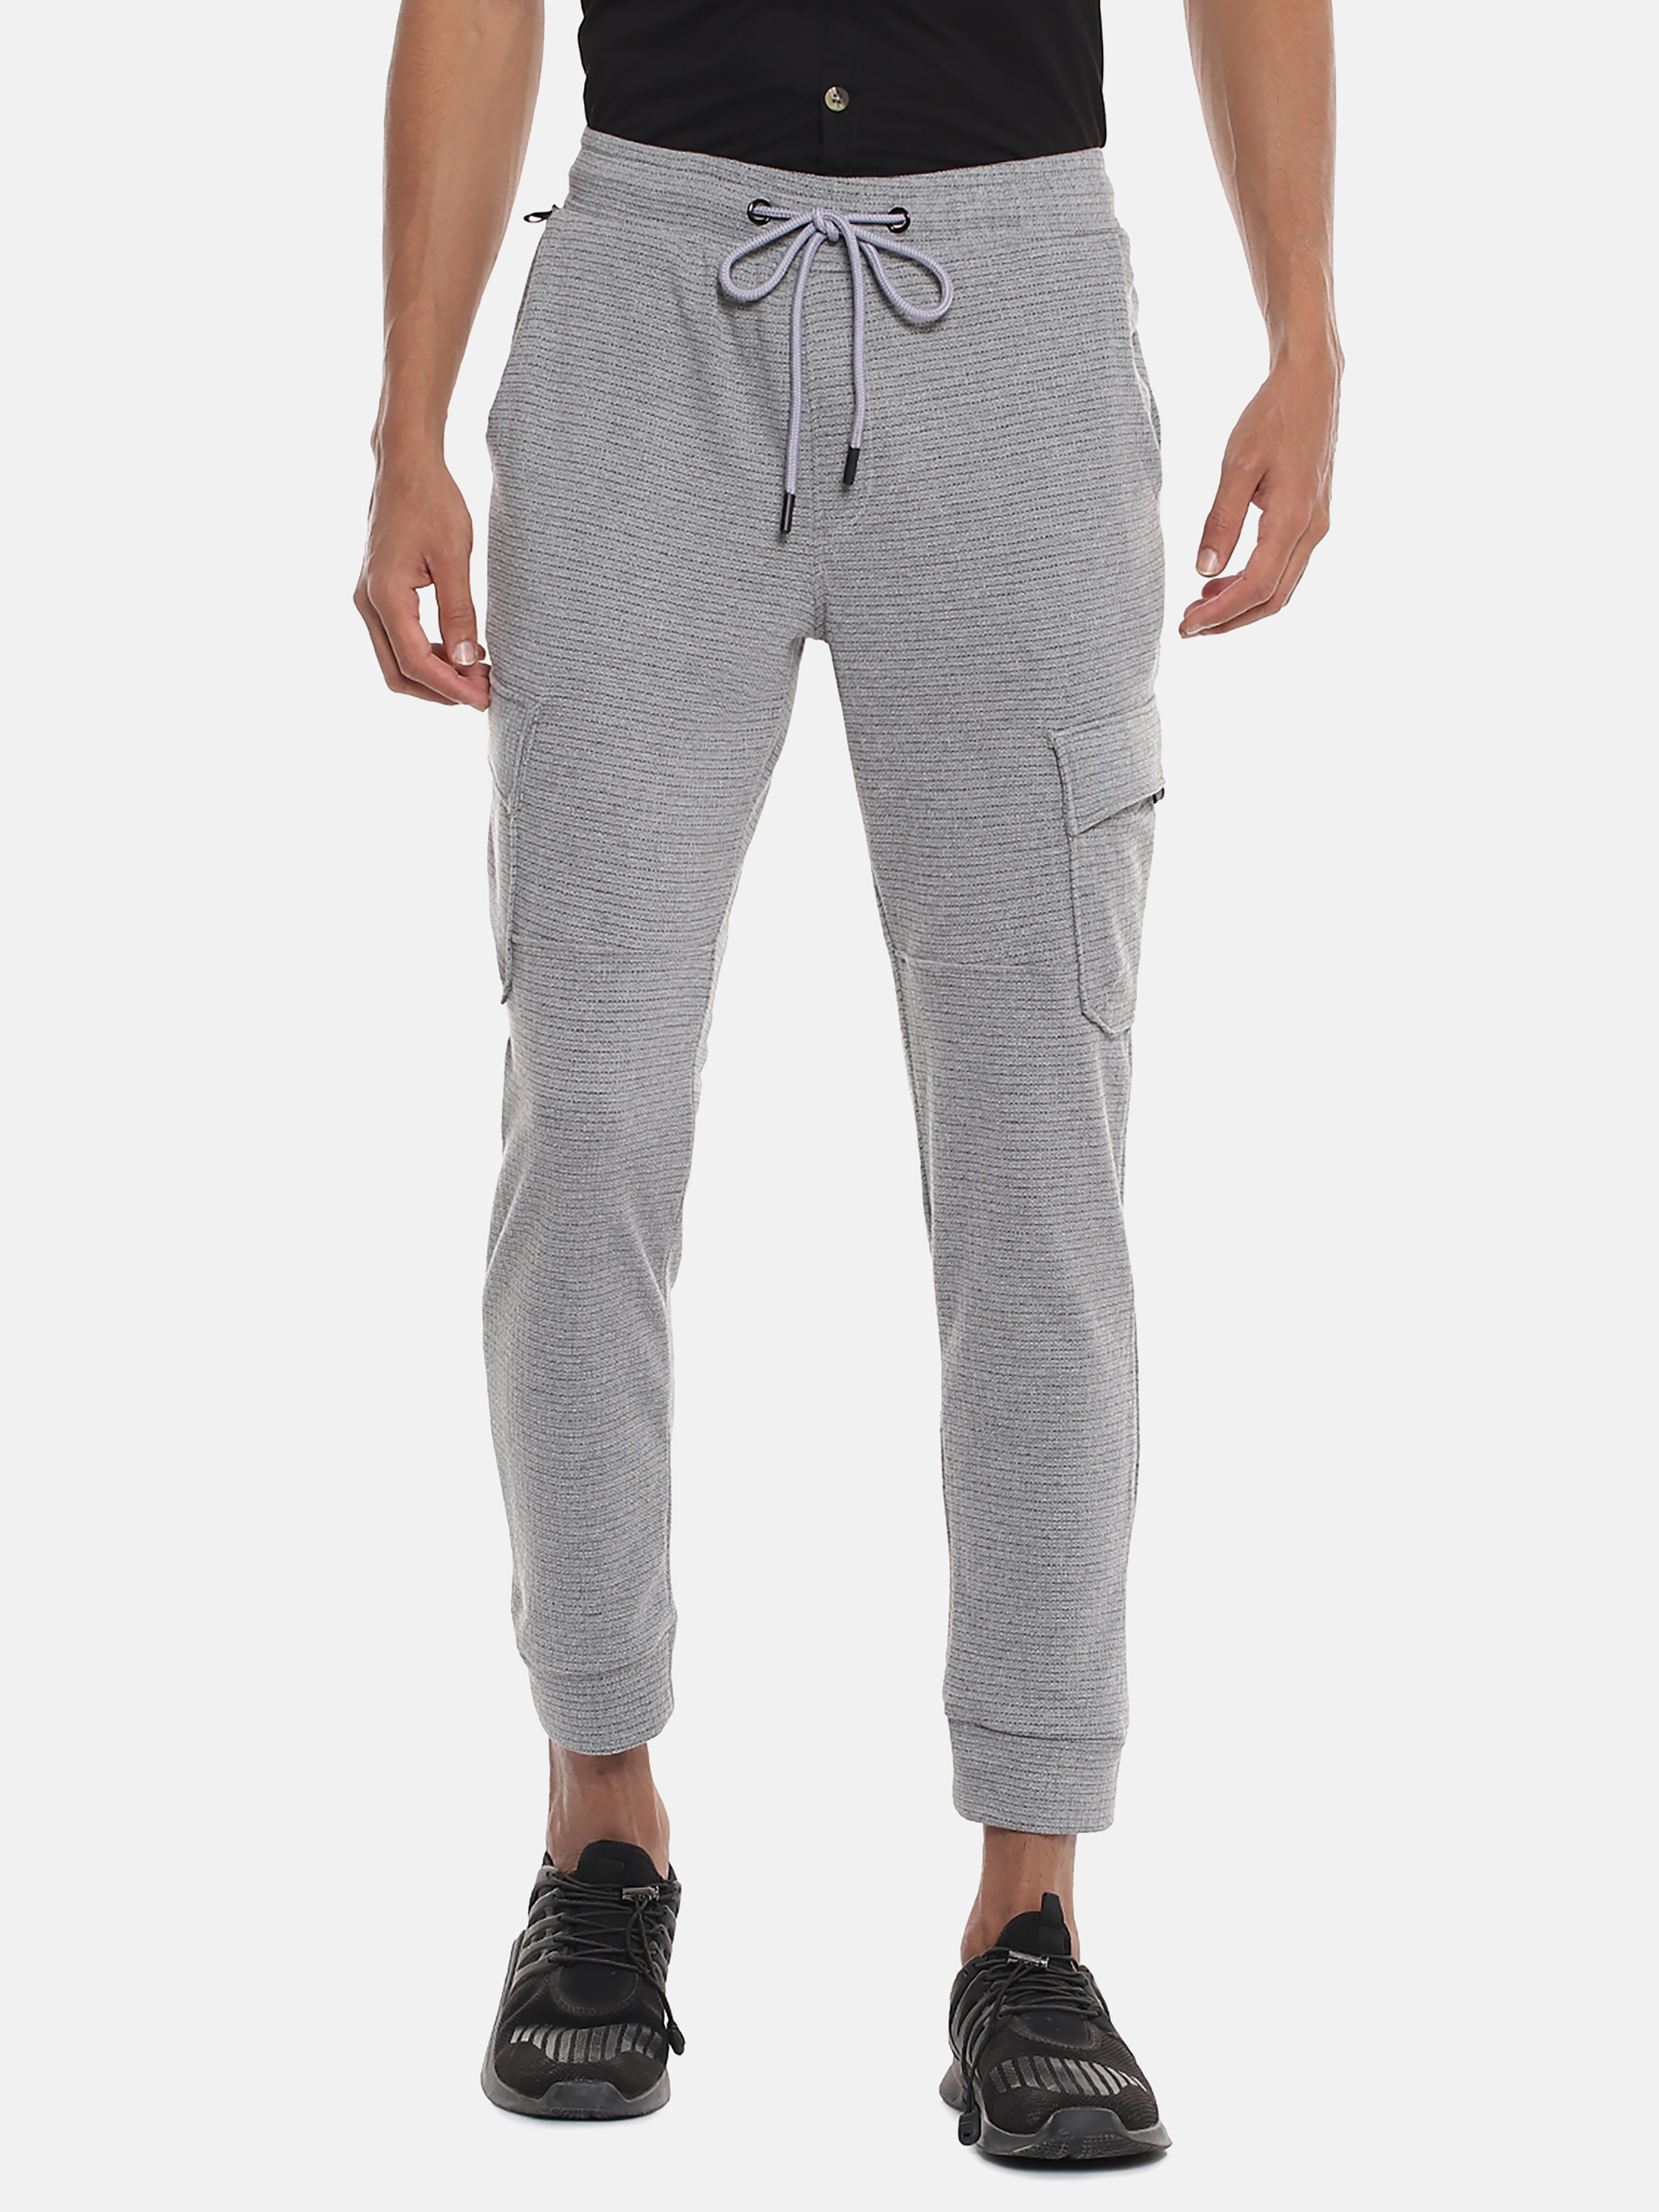 Campus Sutra Men Solid StylishGrey Color Trackpant.